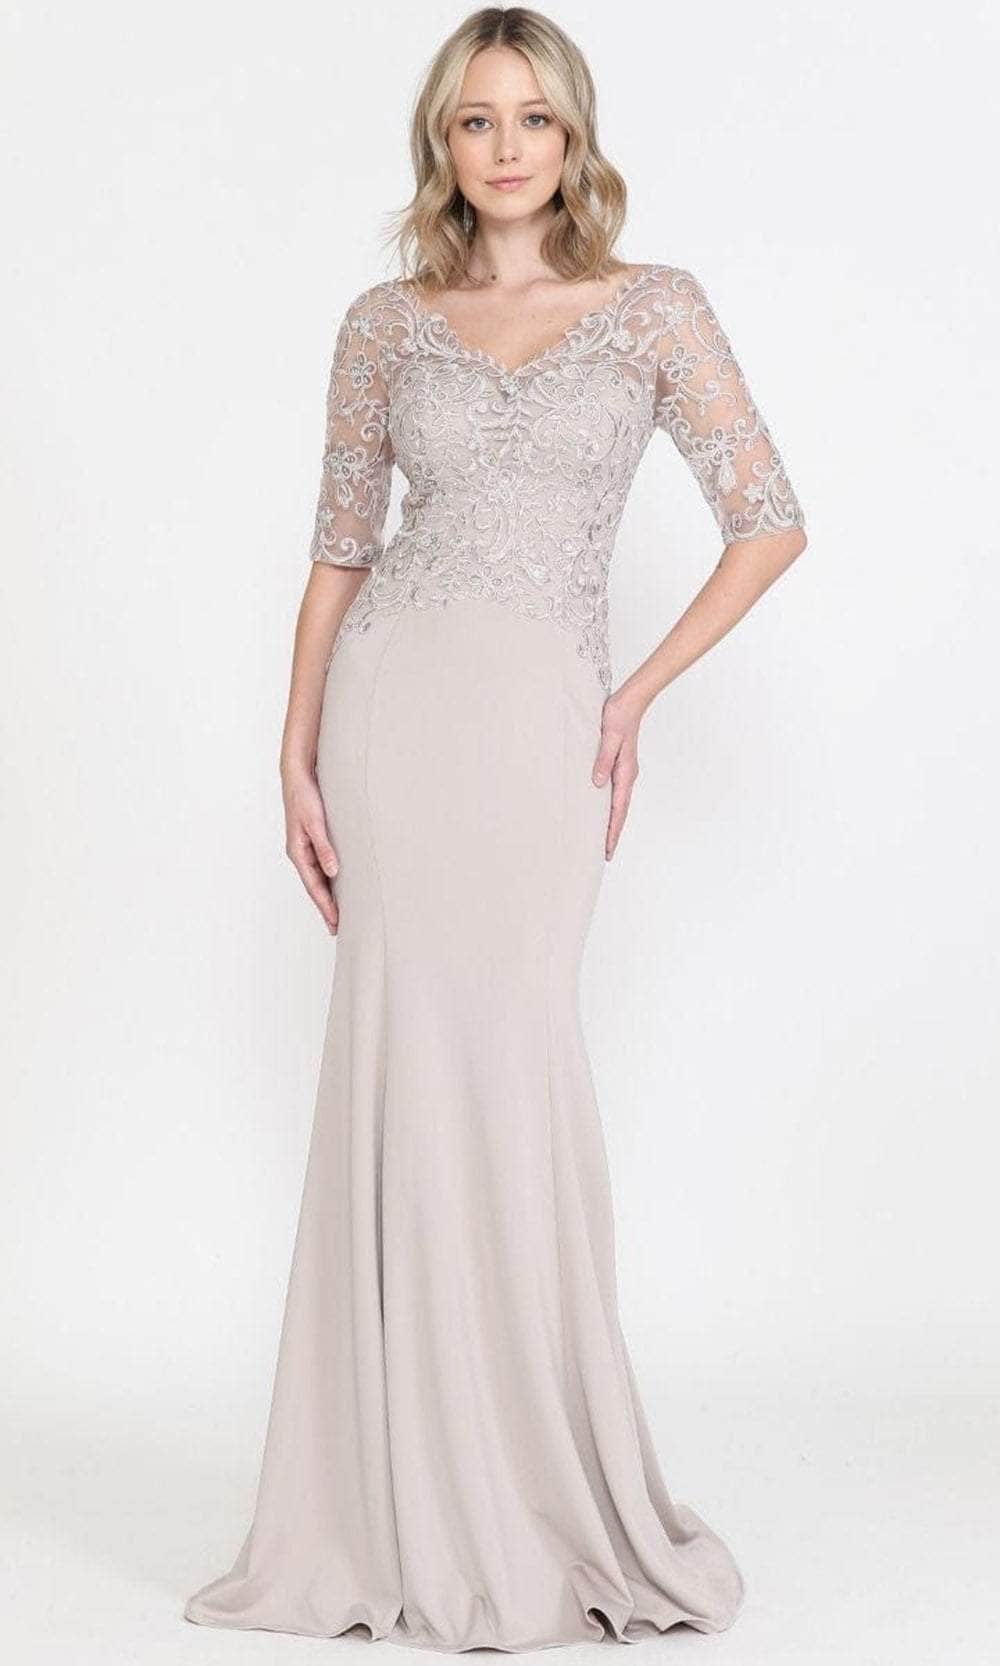 Image of Poly USA 8560 - Quarter Length Sleeved Sheath Evening Gown